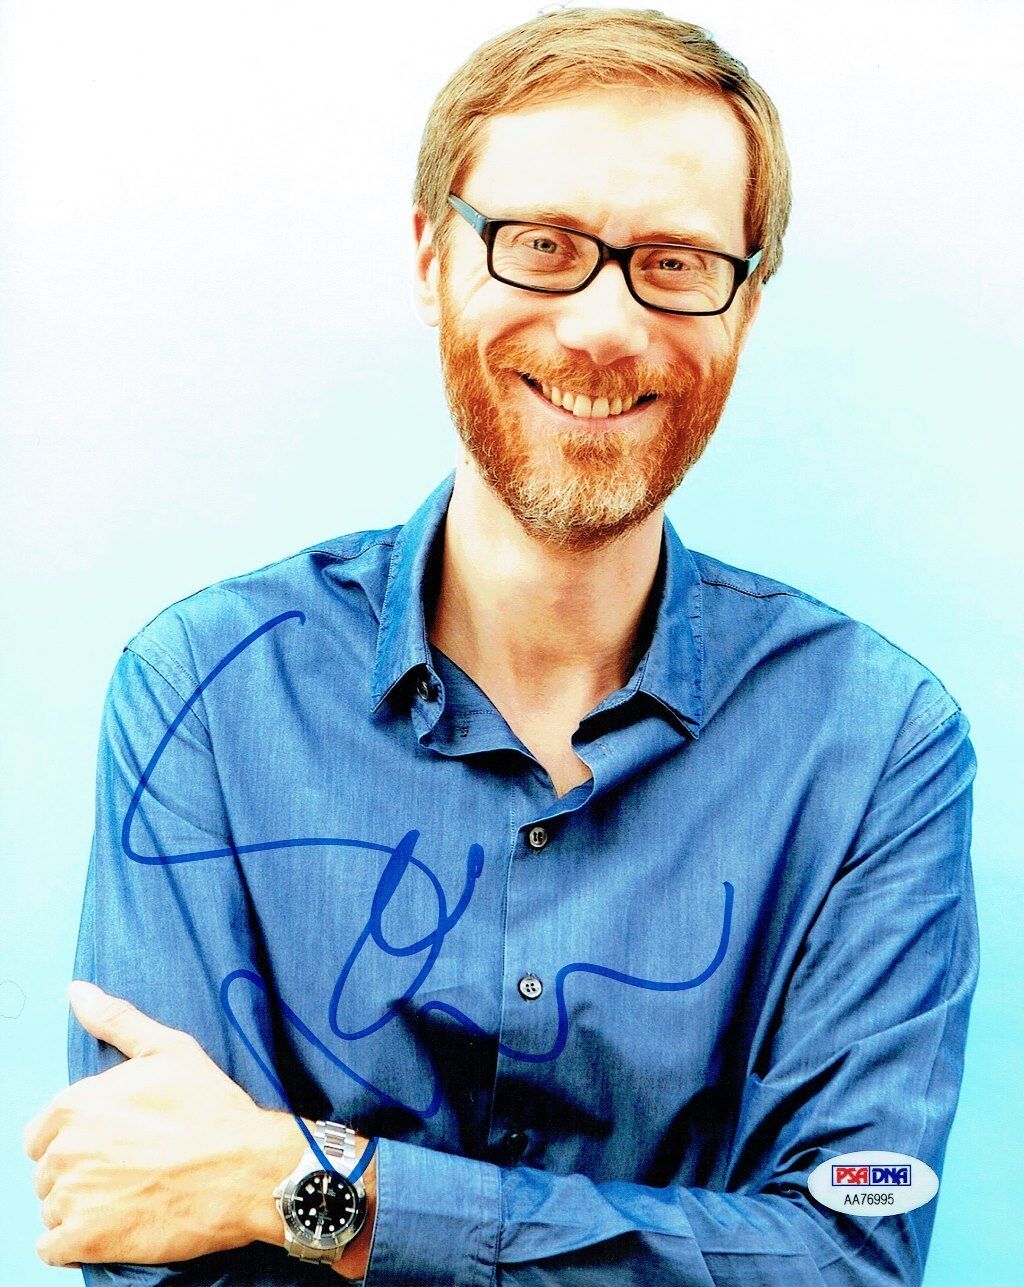 Stephen Merchant Signed Authentic Autographed 8x10 Photo Poster painting PSA/DNA #AA76995